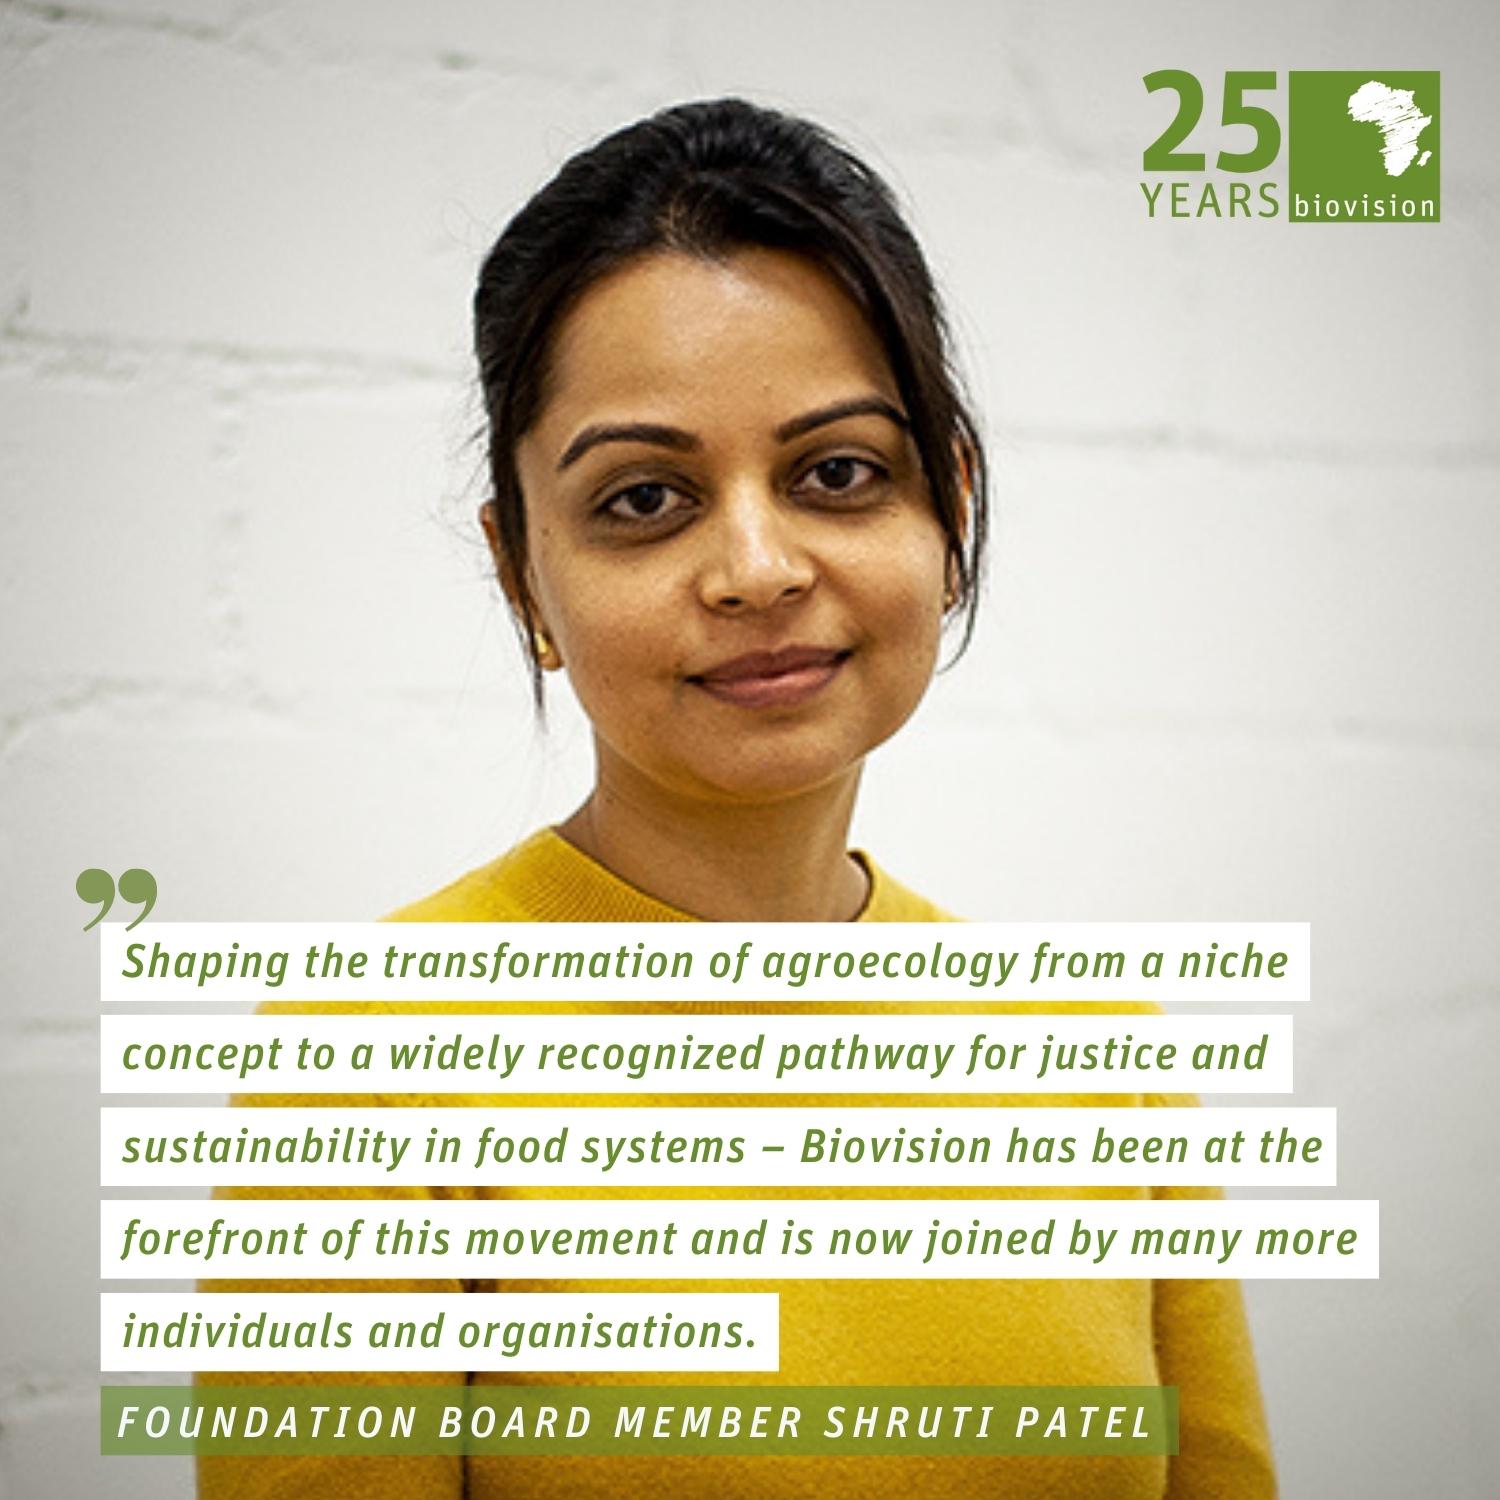 Shruti Patel sees Biovision's greatest lever for systemic change in identifying sustainable solutions.